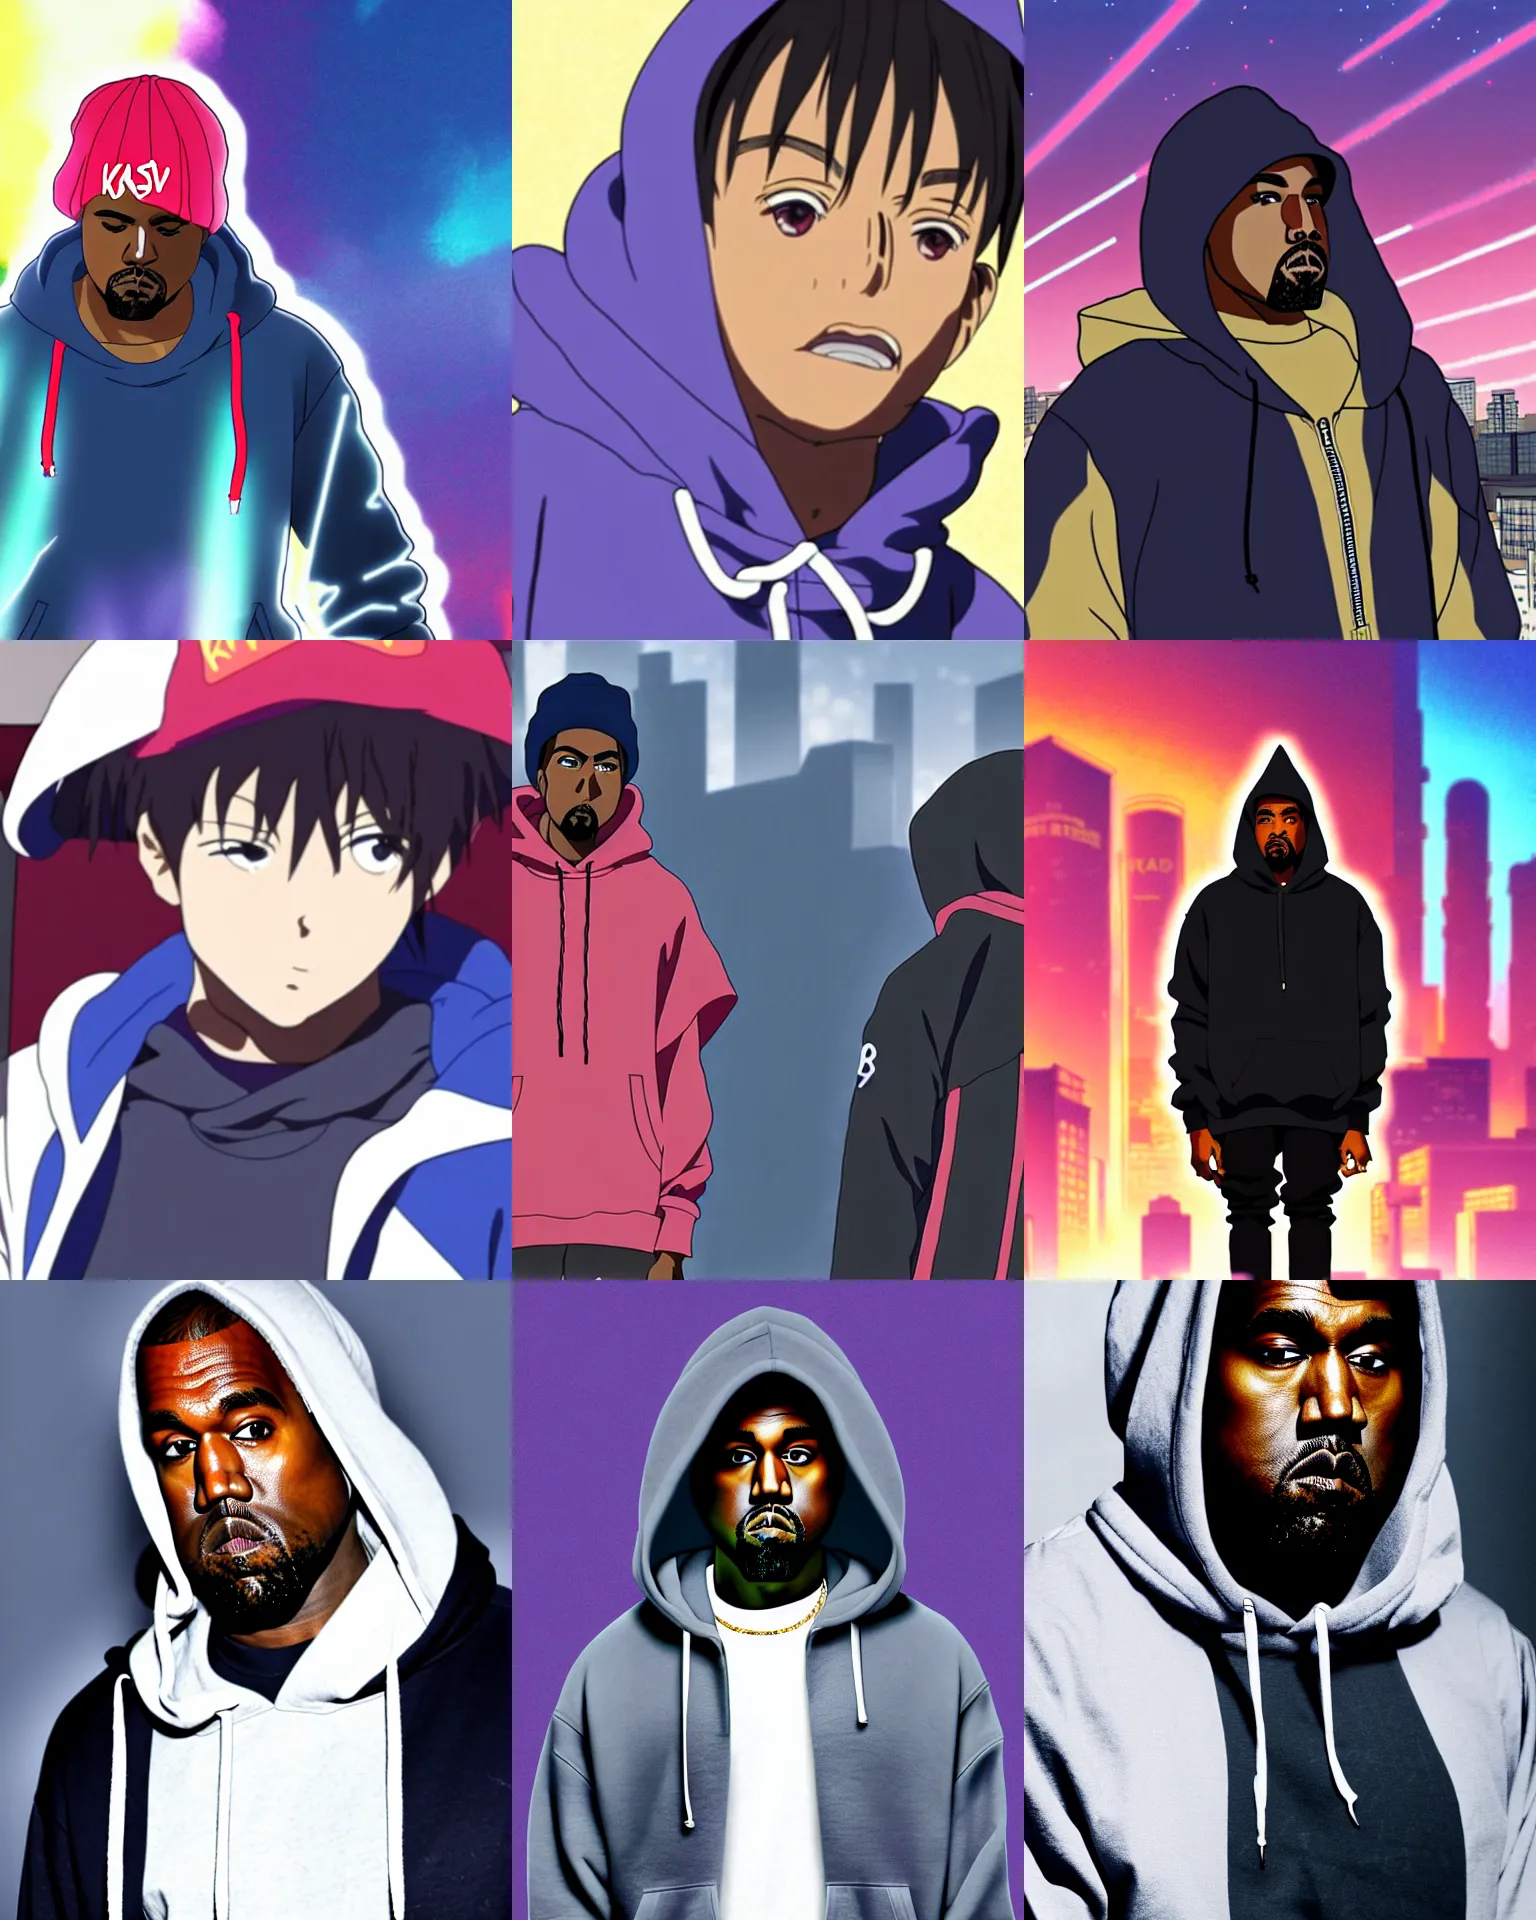 From Kanye West to Lil Uzi Vert The Anime and Hip Hop Connection  MEFeater